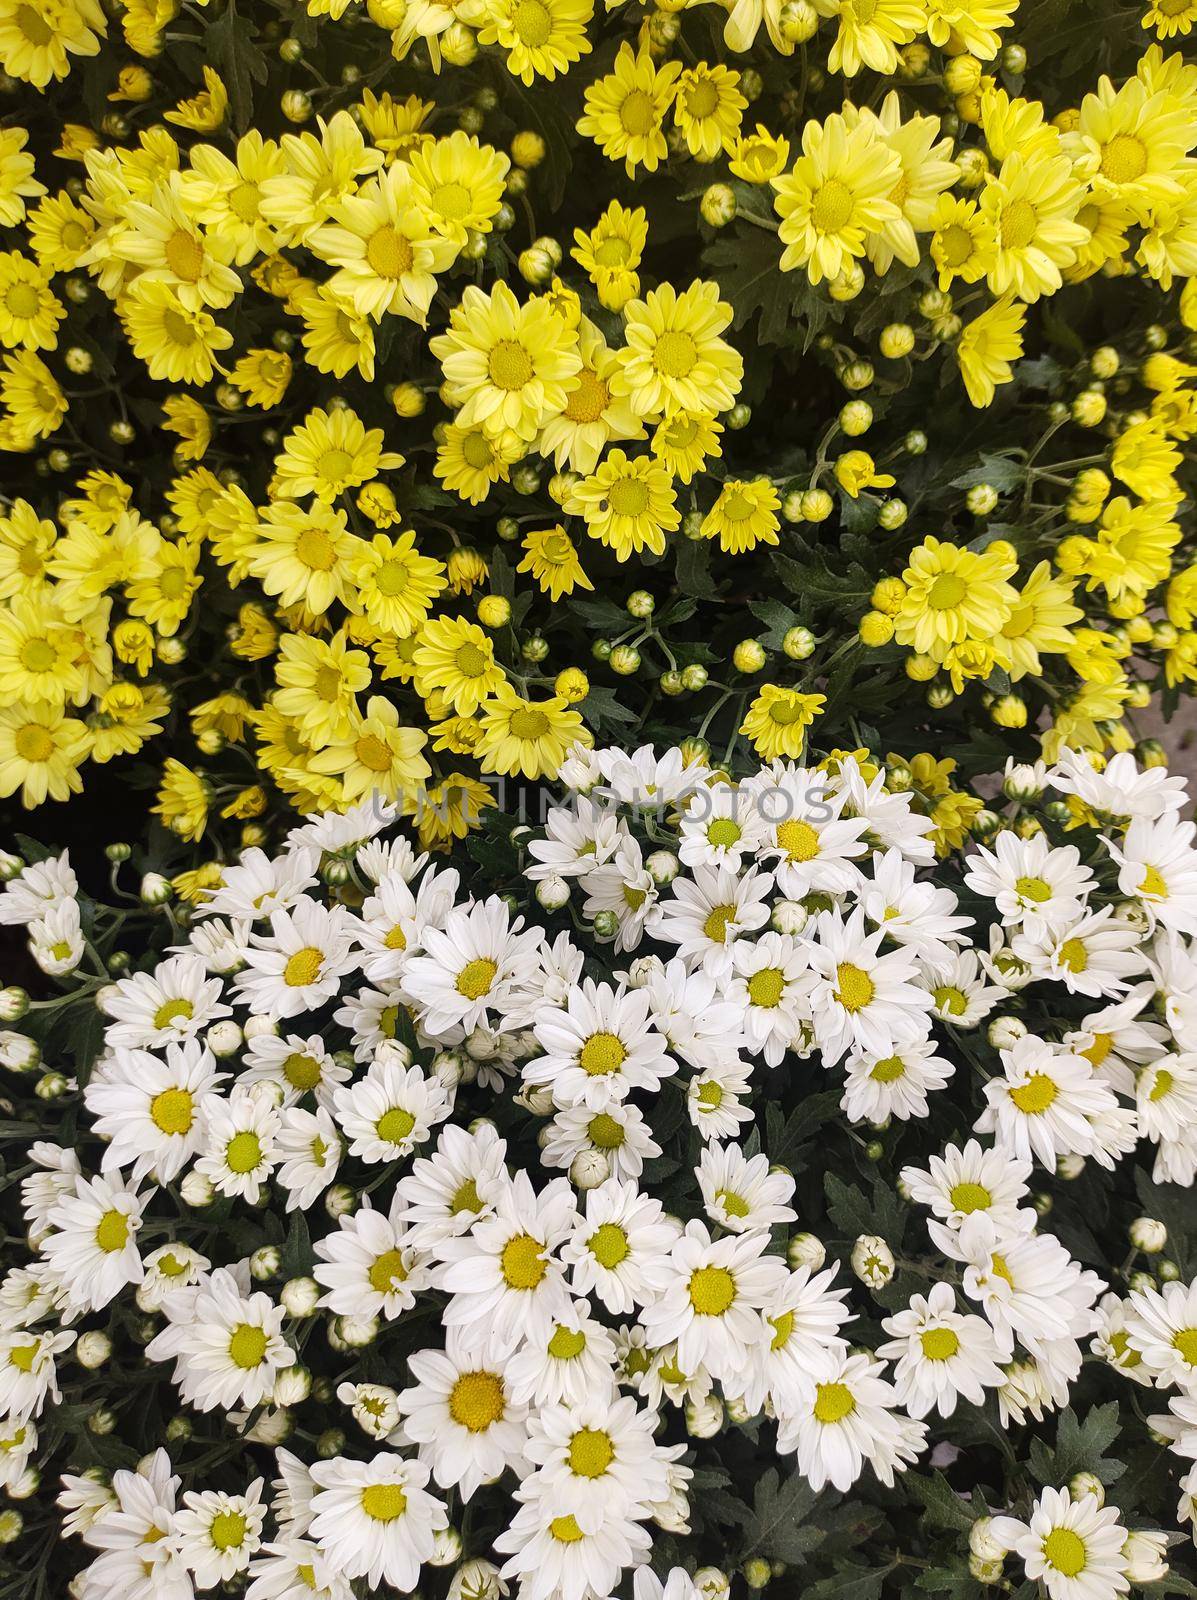 Flower bed full of yellow and white chrysanthemums half and half, seen from above.